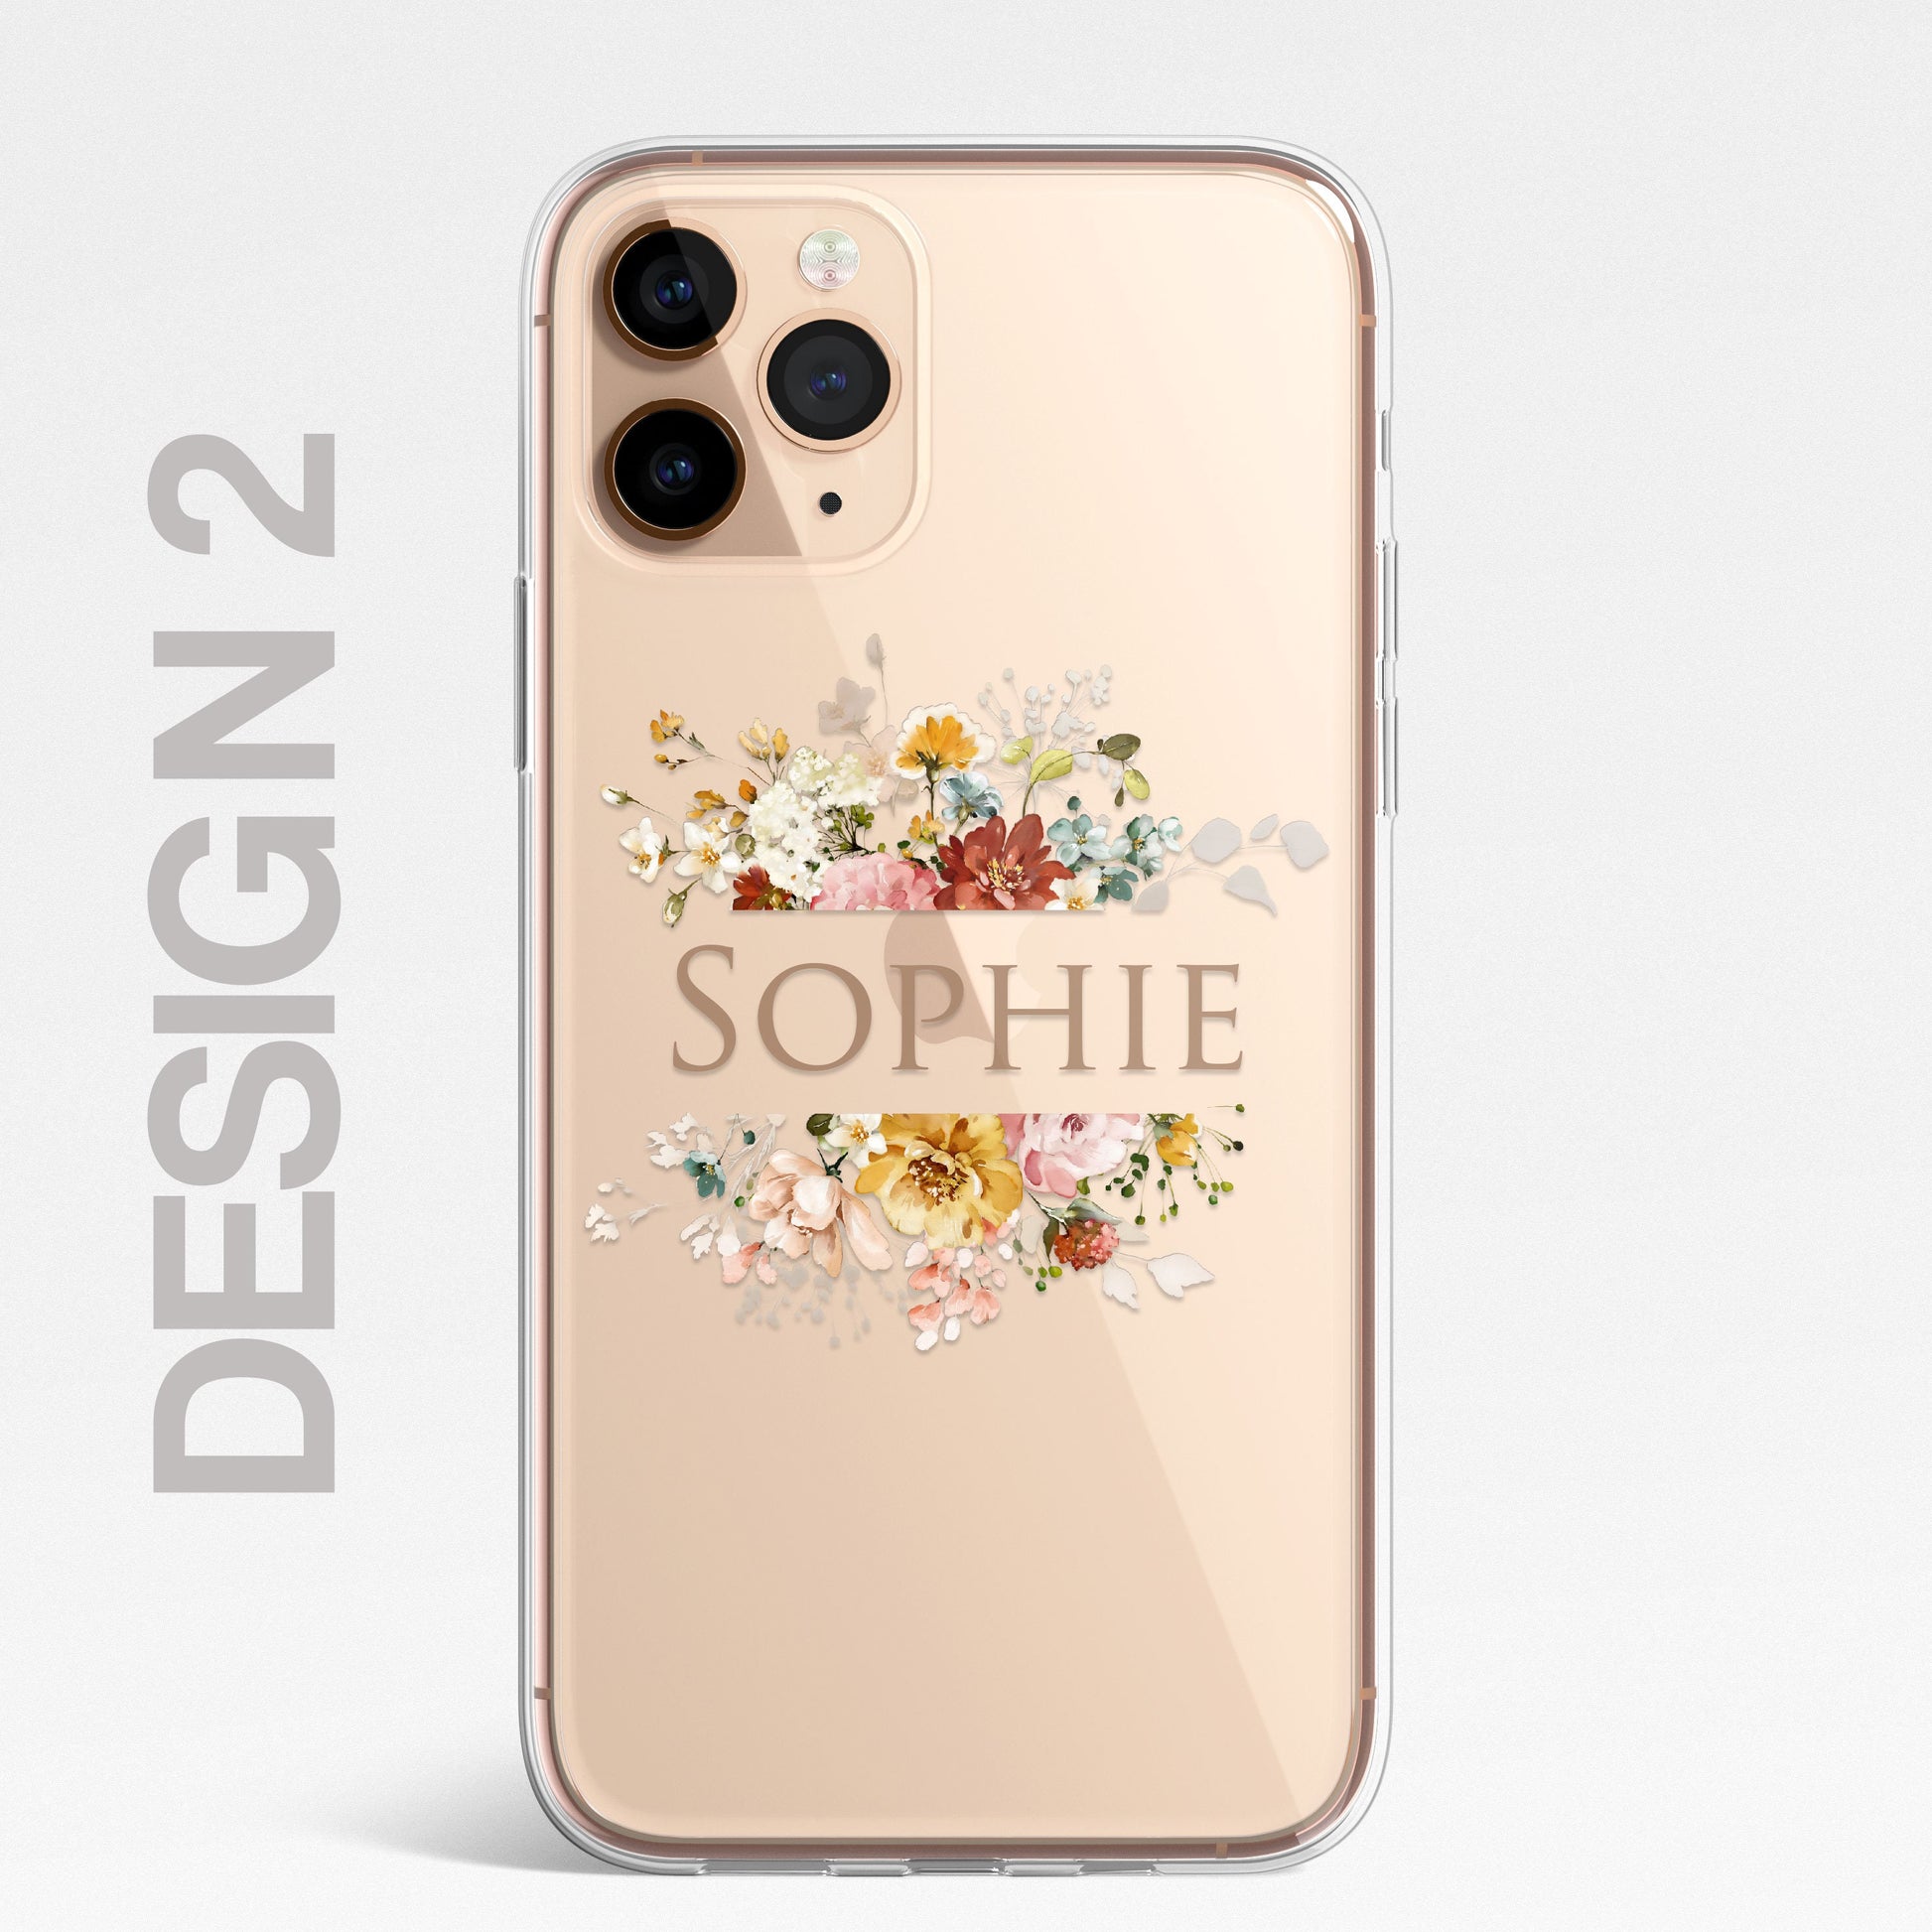 Personalised Floral iPhone Custom Silicone CLEAR Phone Case Cover Flowers English Roses Gold iPhone 11 XS XR Max Plus Pro Samsung Galaxy